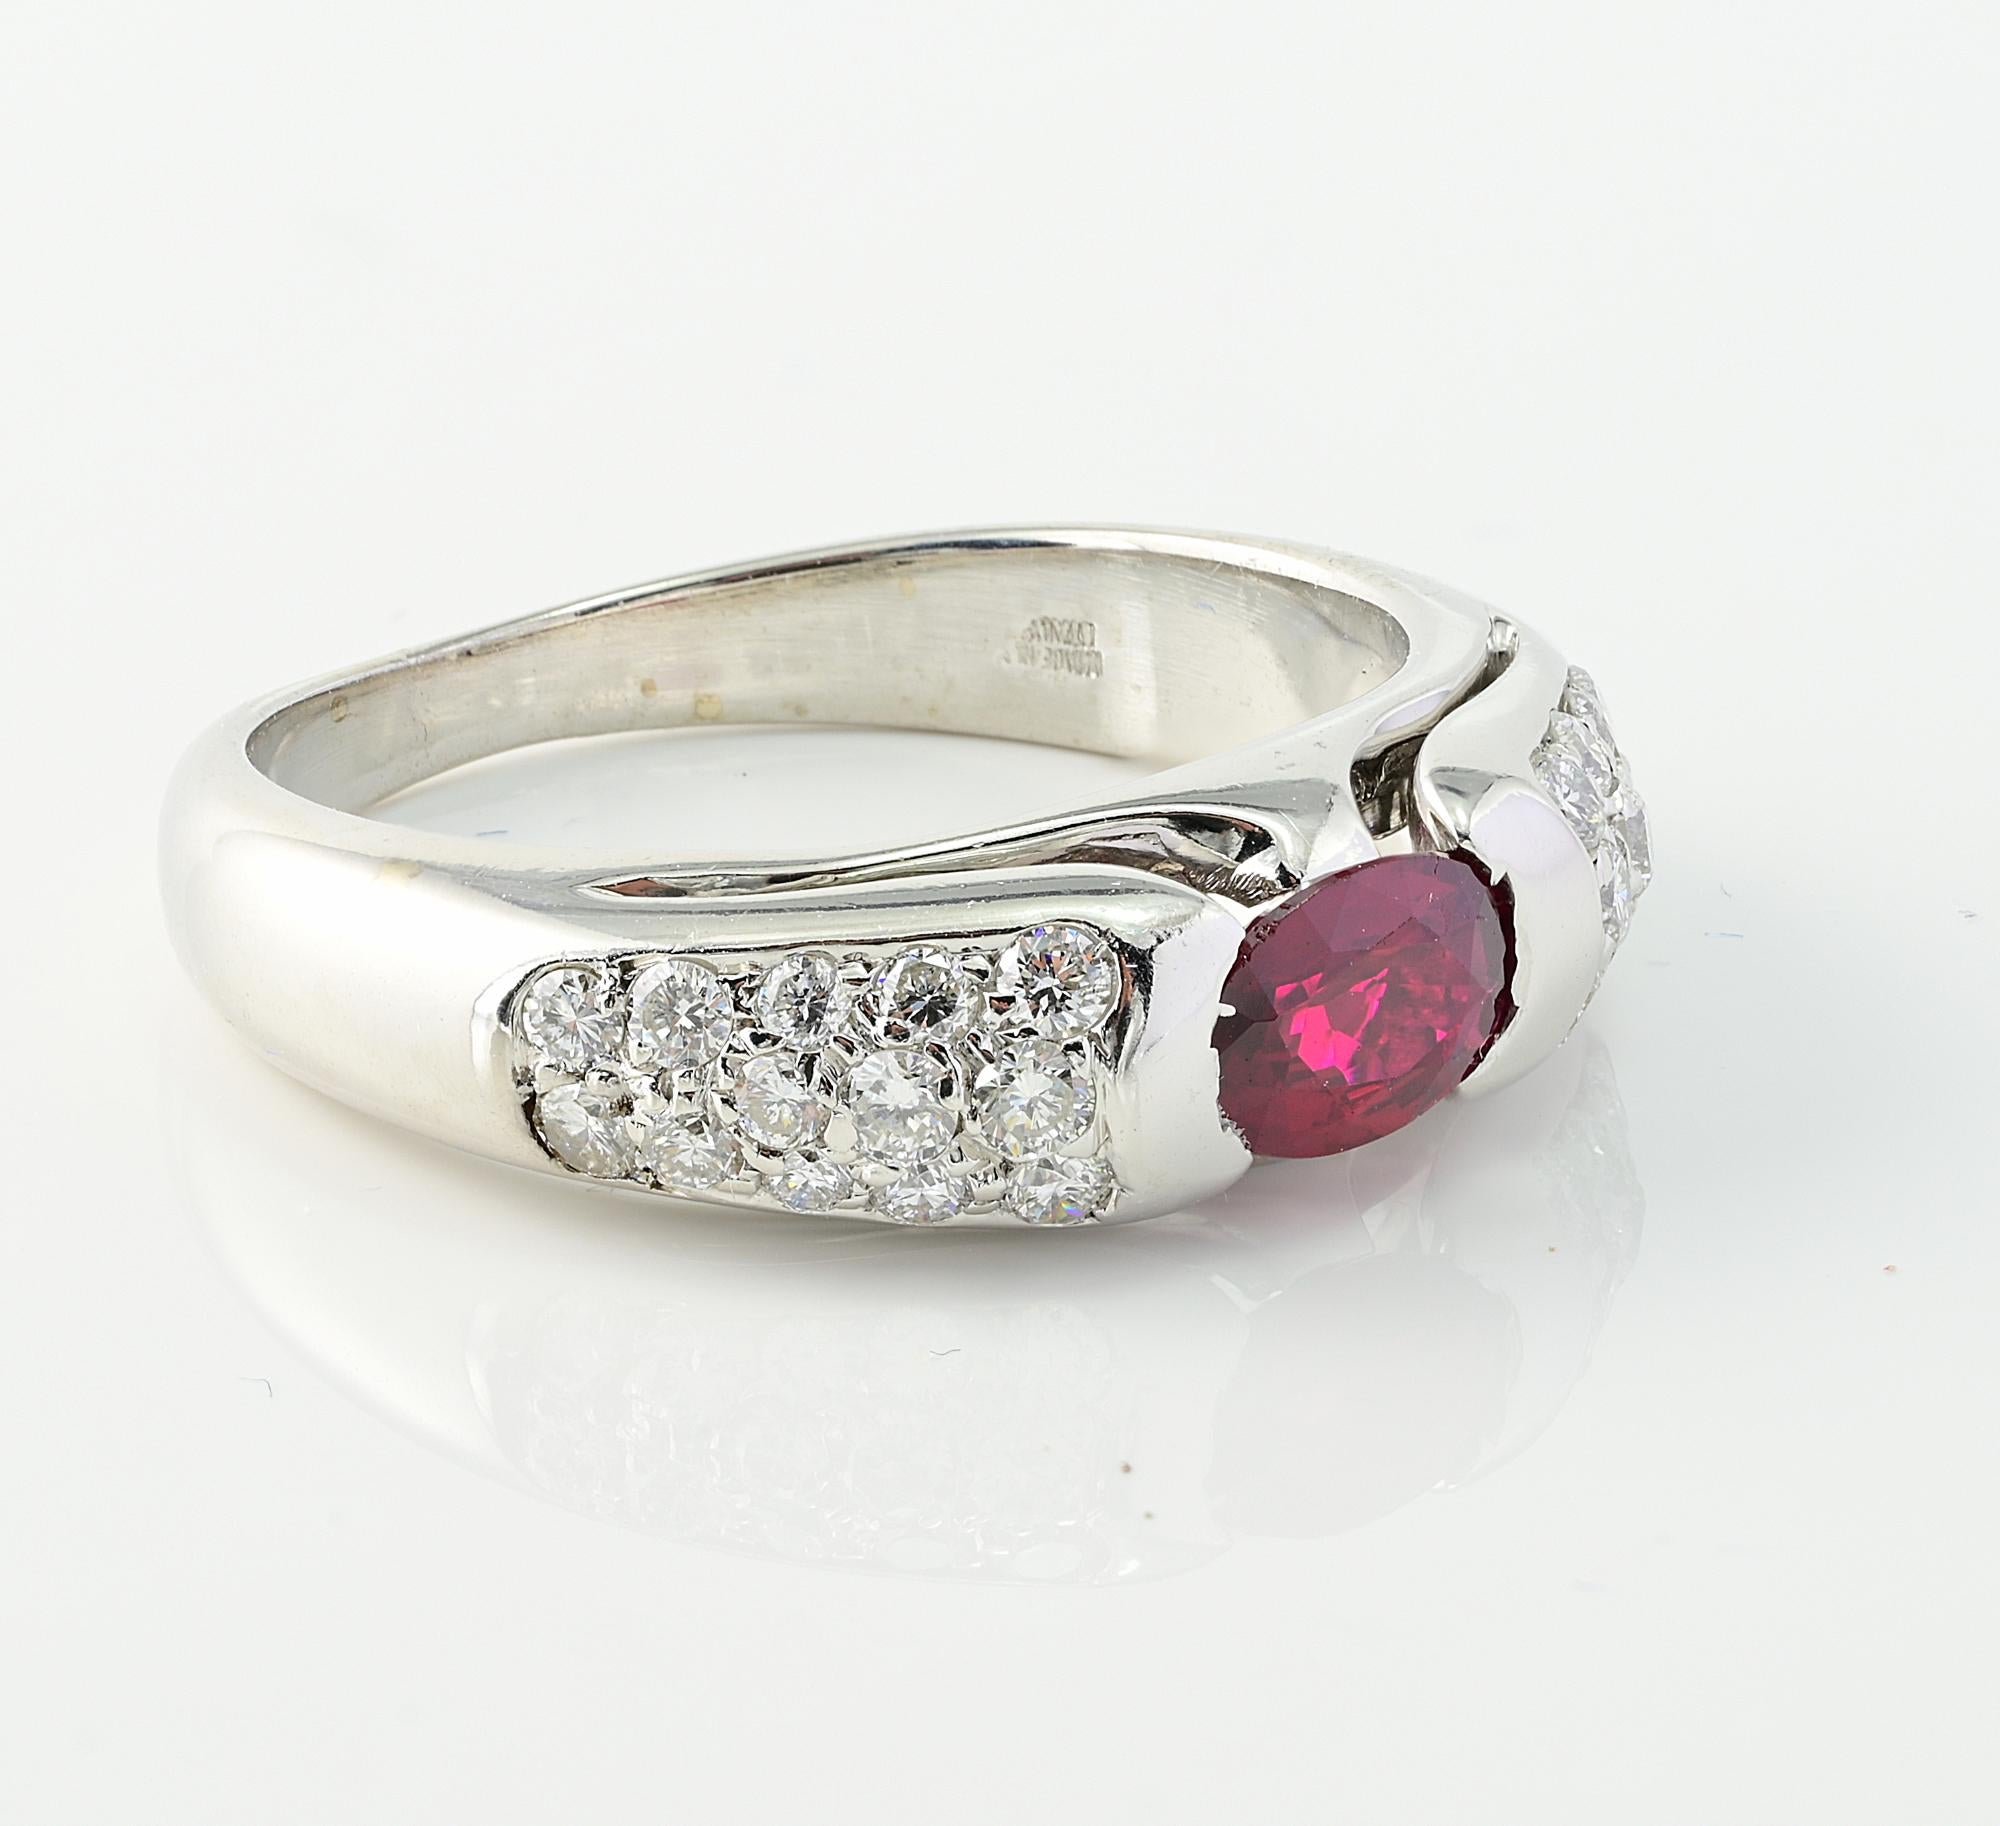 Contemporary Iconic Bvlgari Ruby Diamond 18KT Ring 1980 For Sale